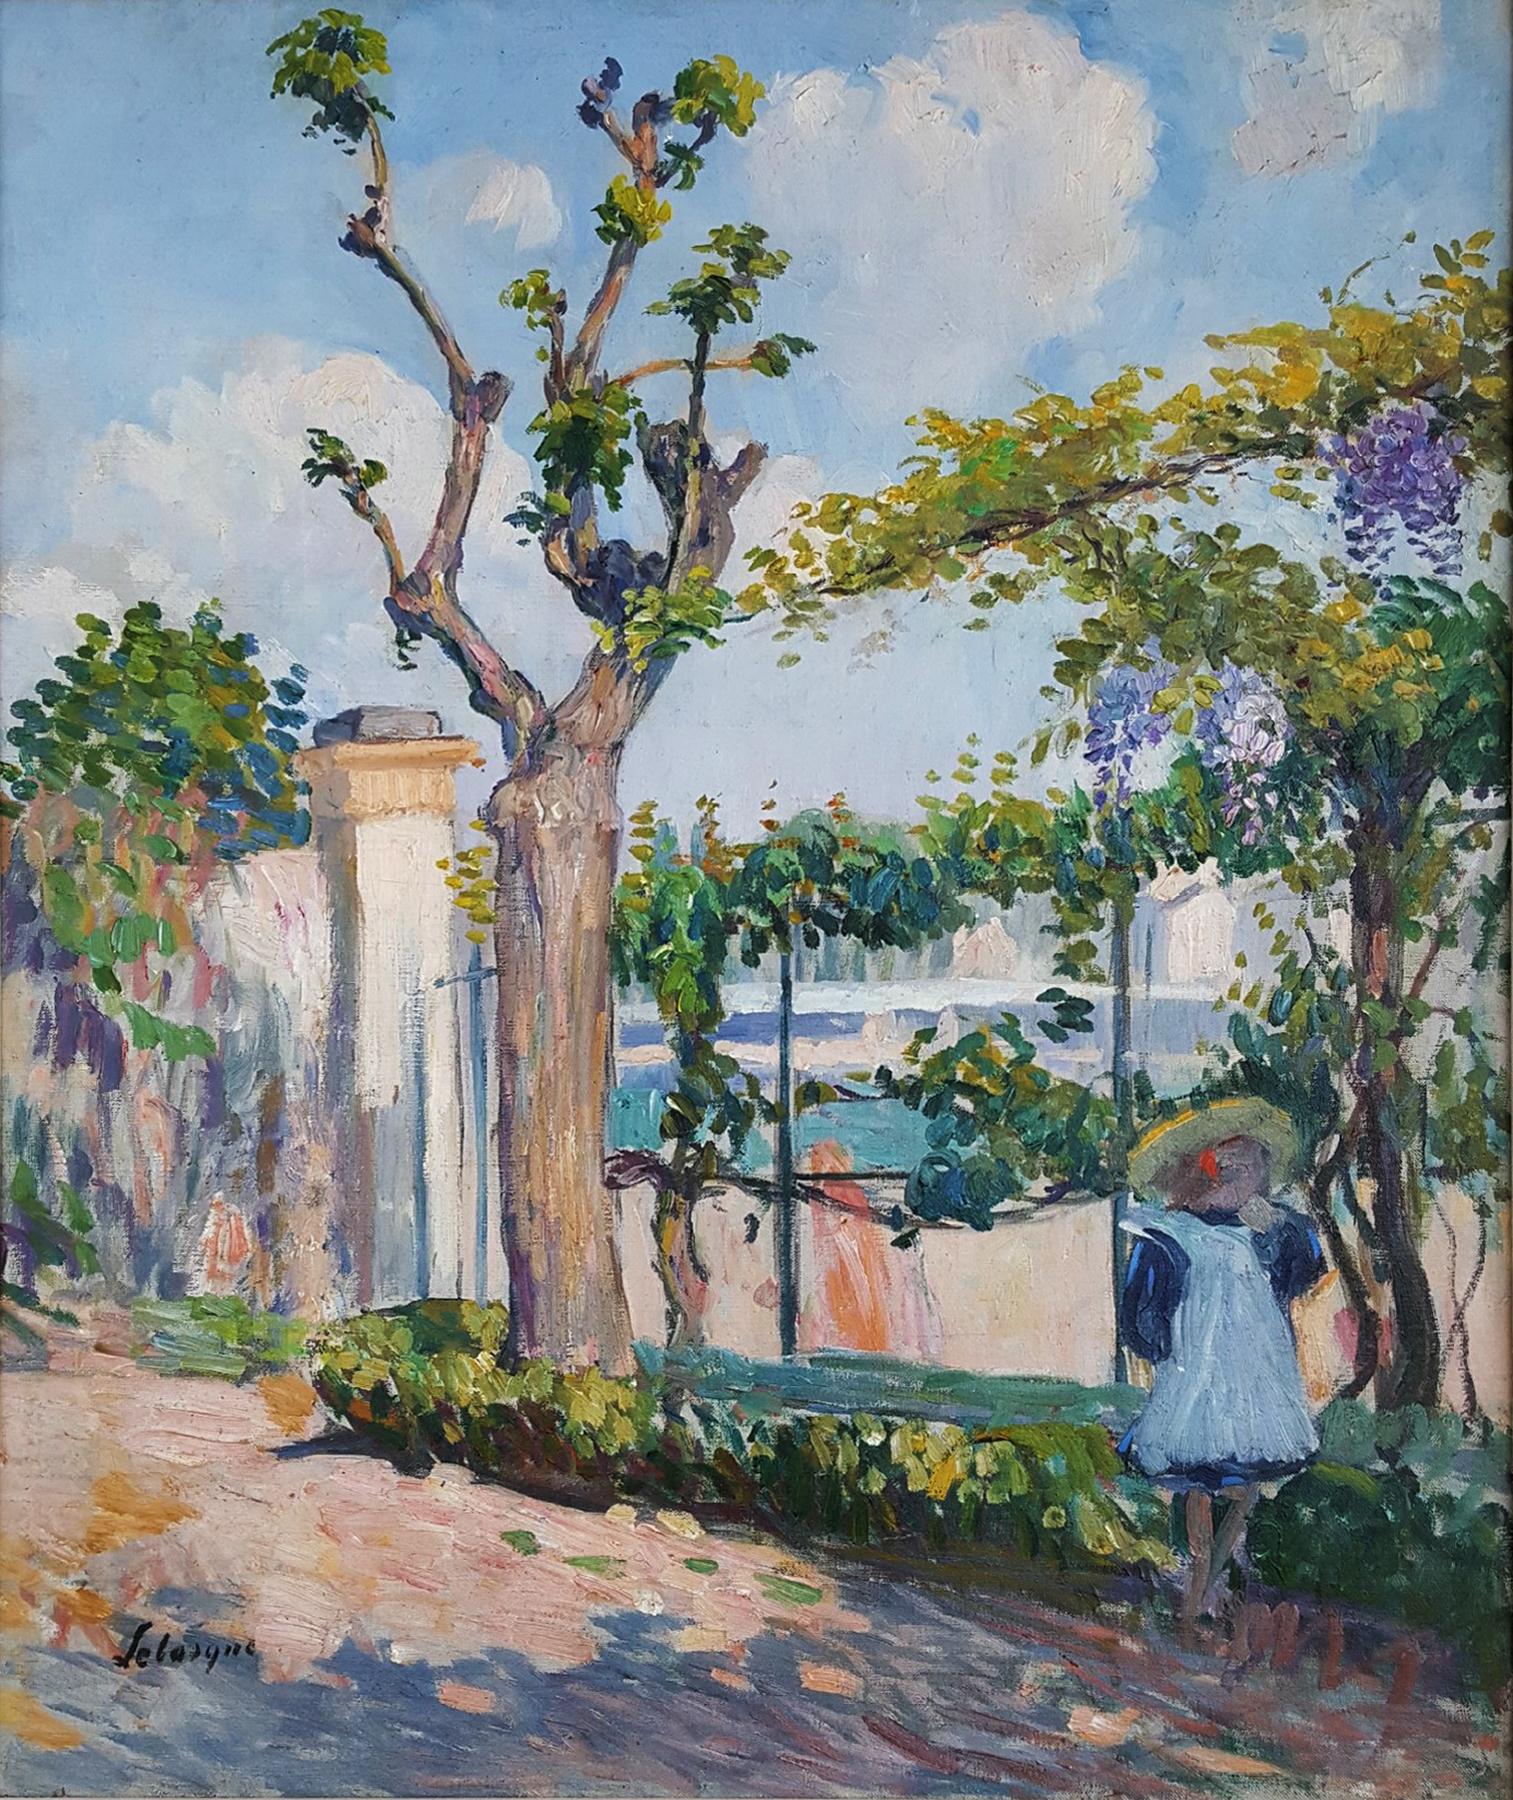 Le Jardin de Lagny - Garden with young girl - Painting by Henri Lebasque